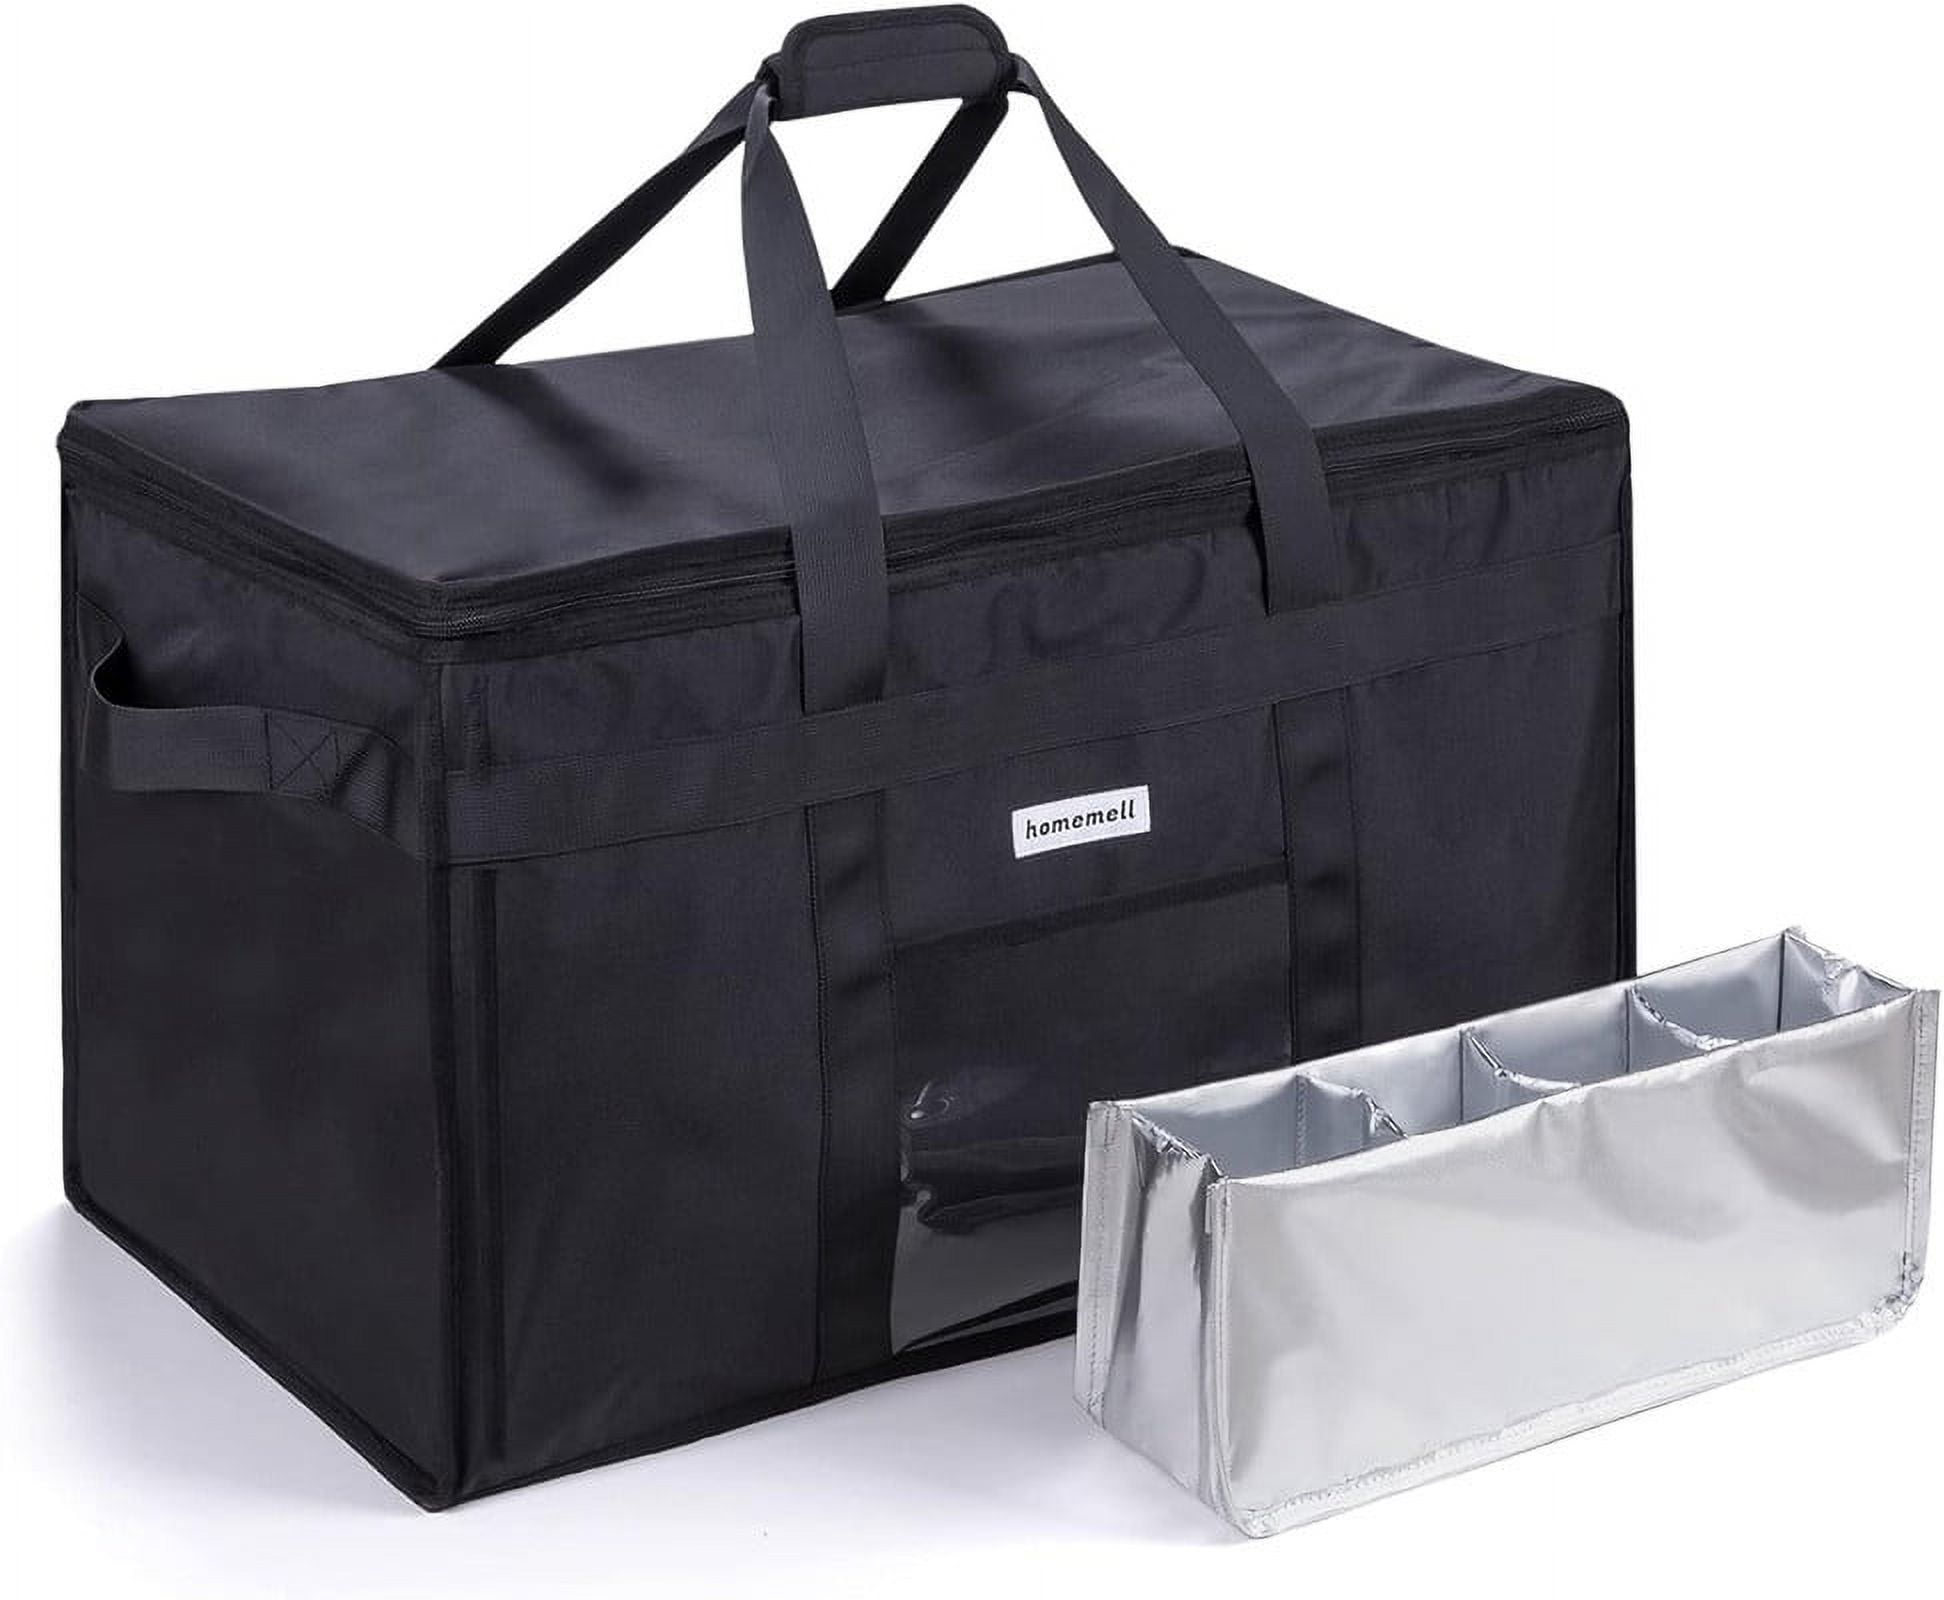 Homemell XXXL Insulated Delivery Bag with Drink Carrier, 23x15x14 ...